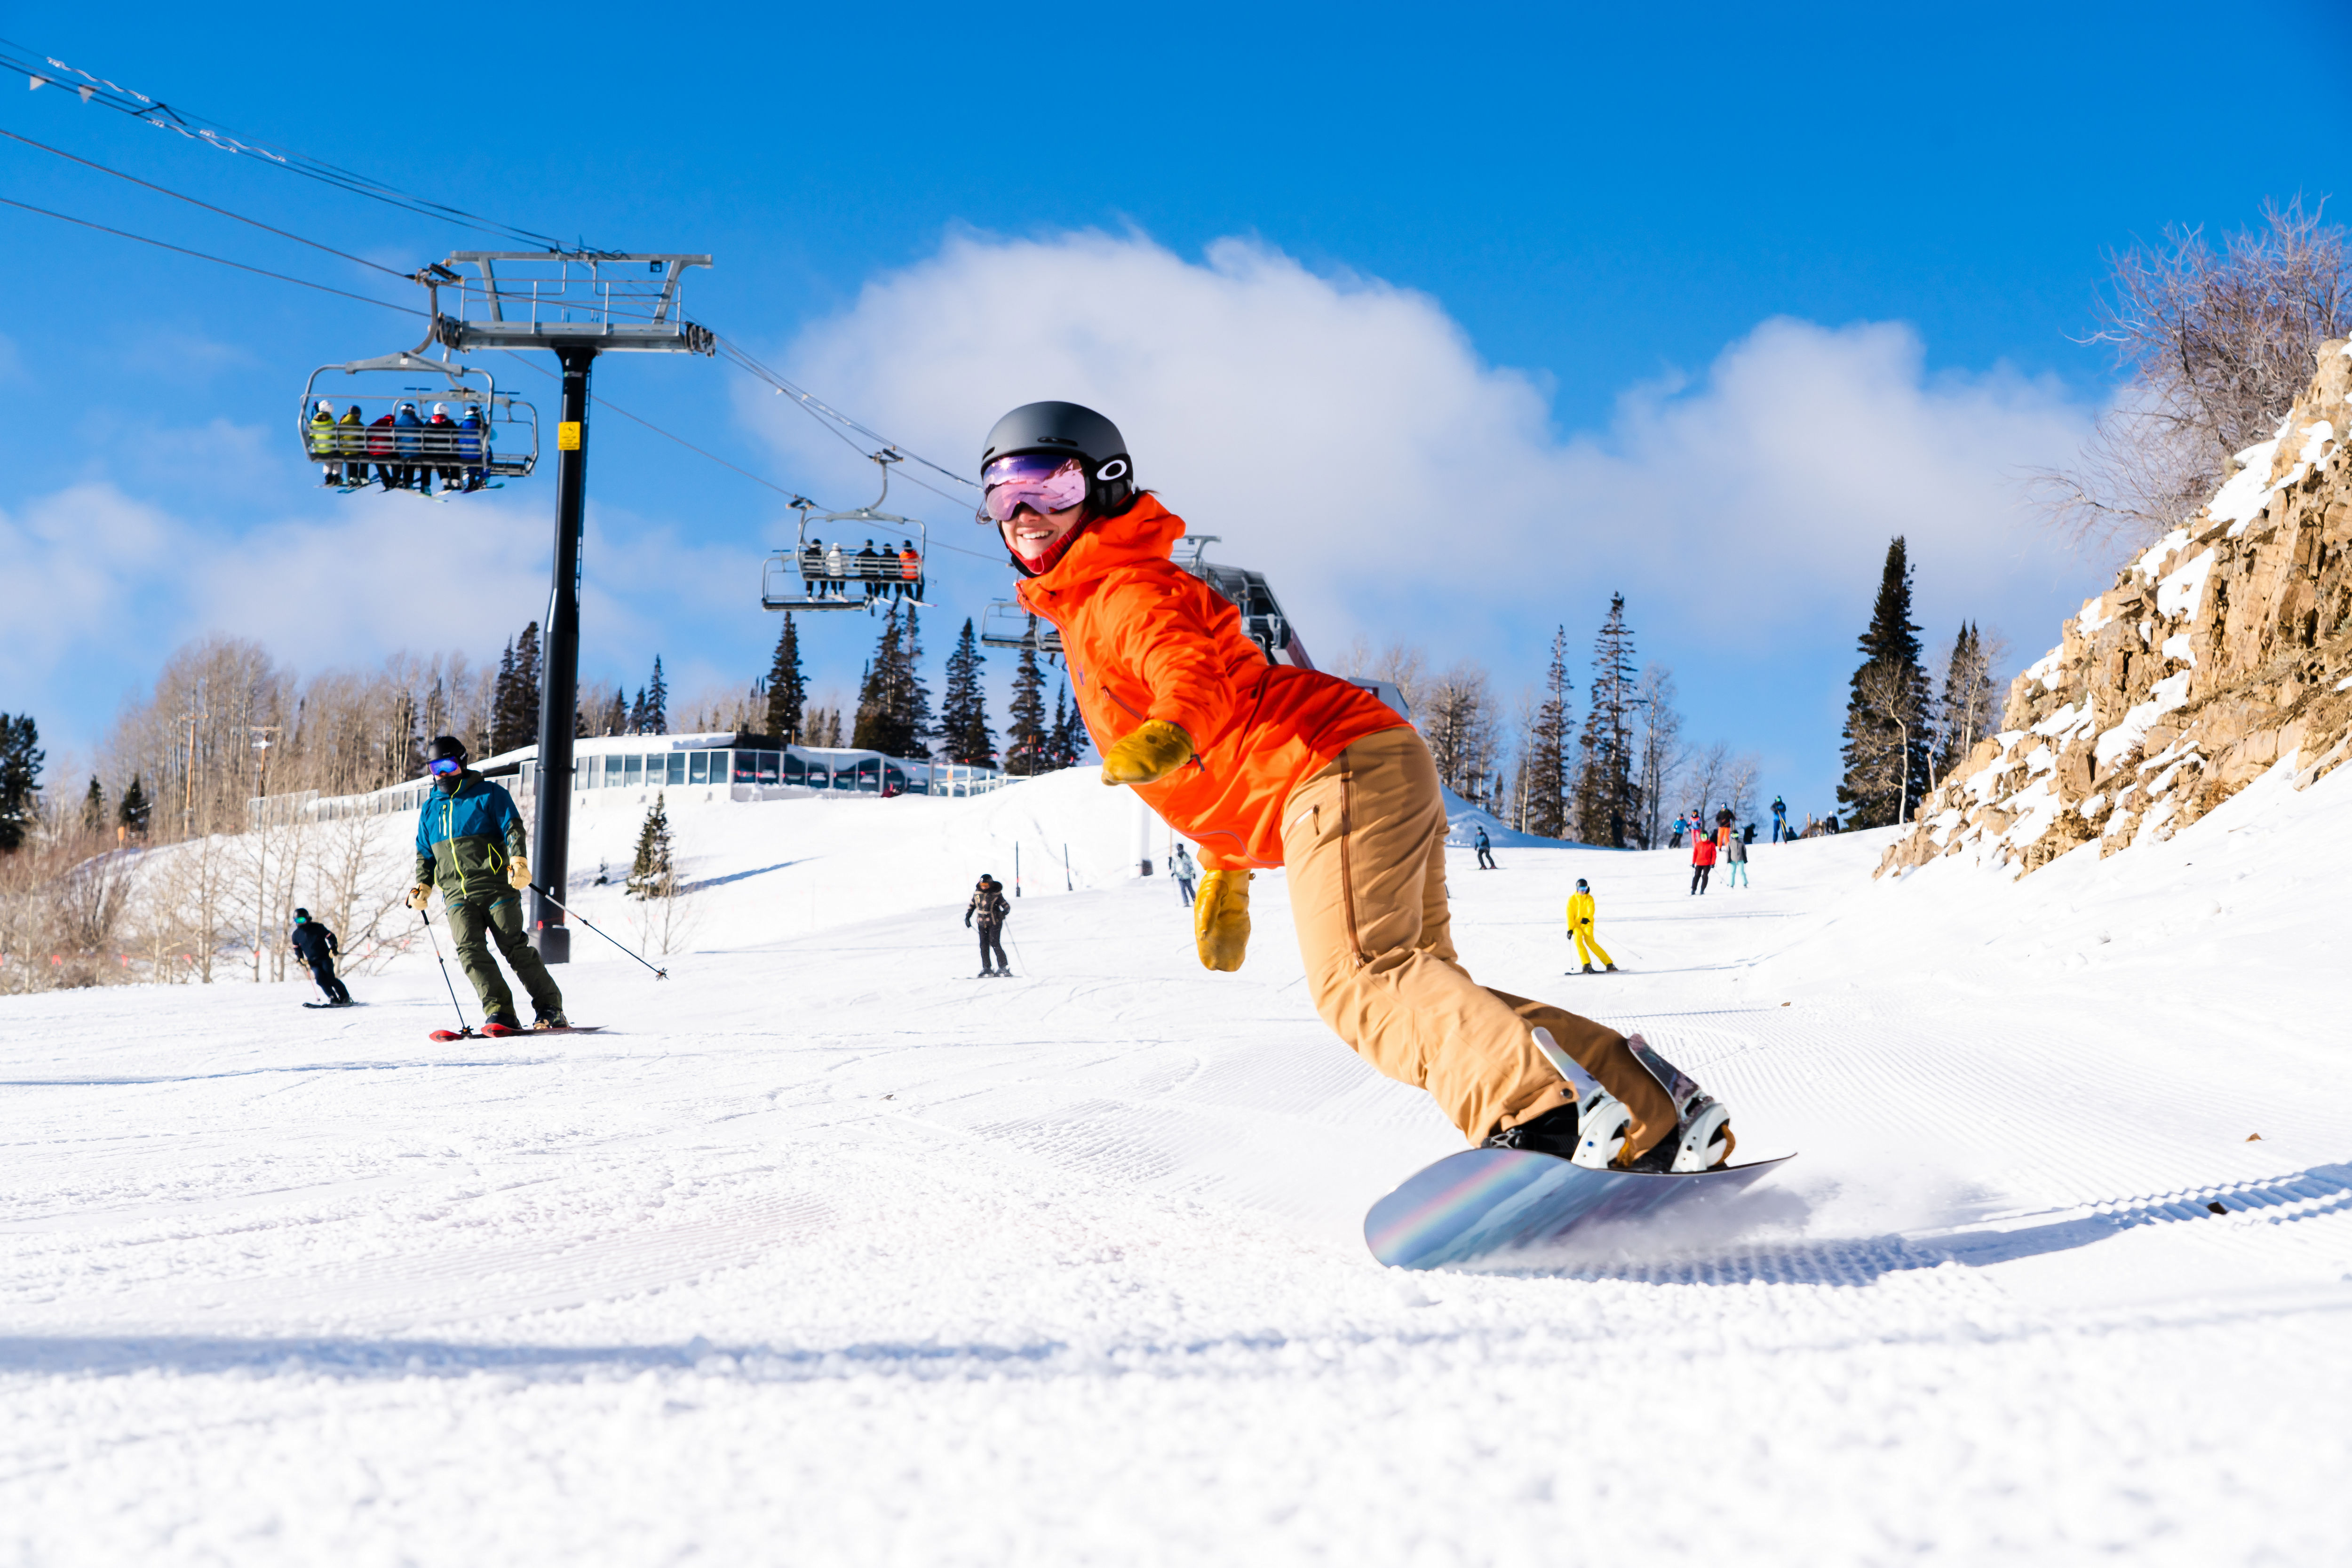 https://scene7.vailresorts.com/is/image/vailresorts/20221118_PC_Chi_001?wid=4000&resMode=sharp2&w=4000&h=2666&fit=constrain,1&dpr=on,2.625